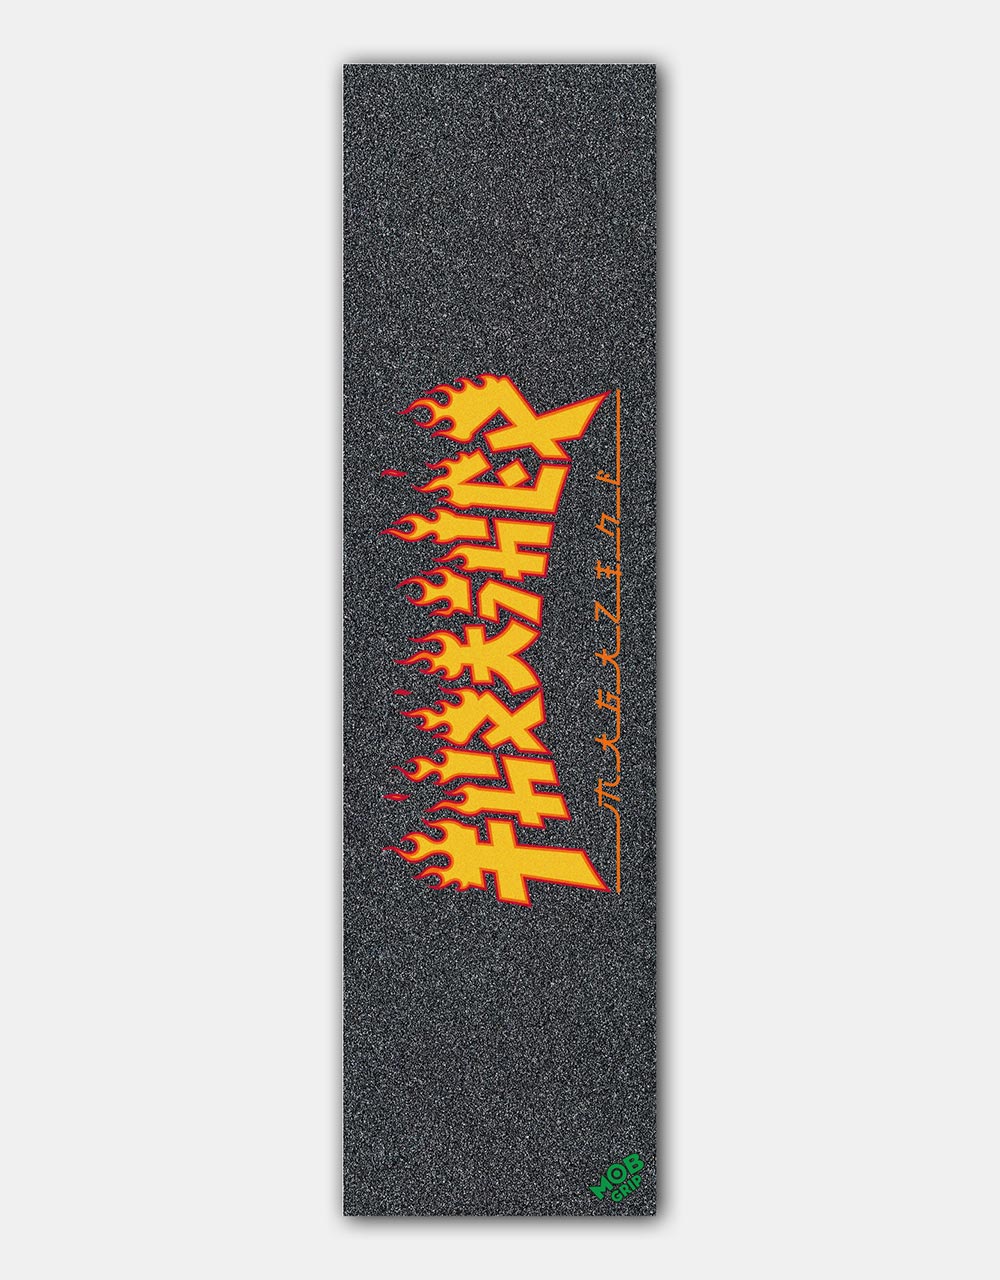 MOB x Thrasher Monster Flame 9" Graphic Grip Tape Sheet